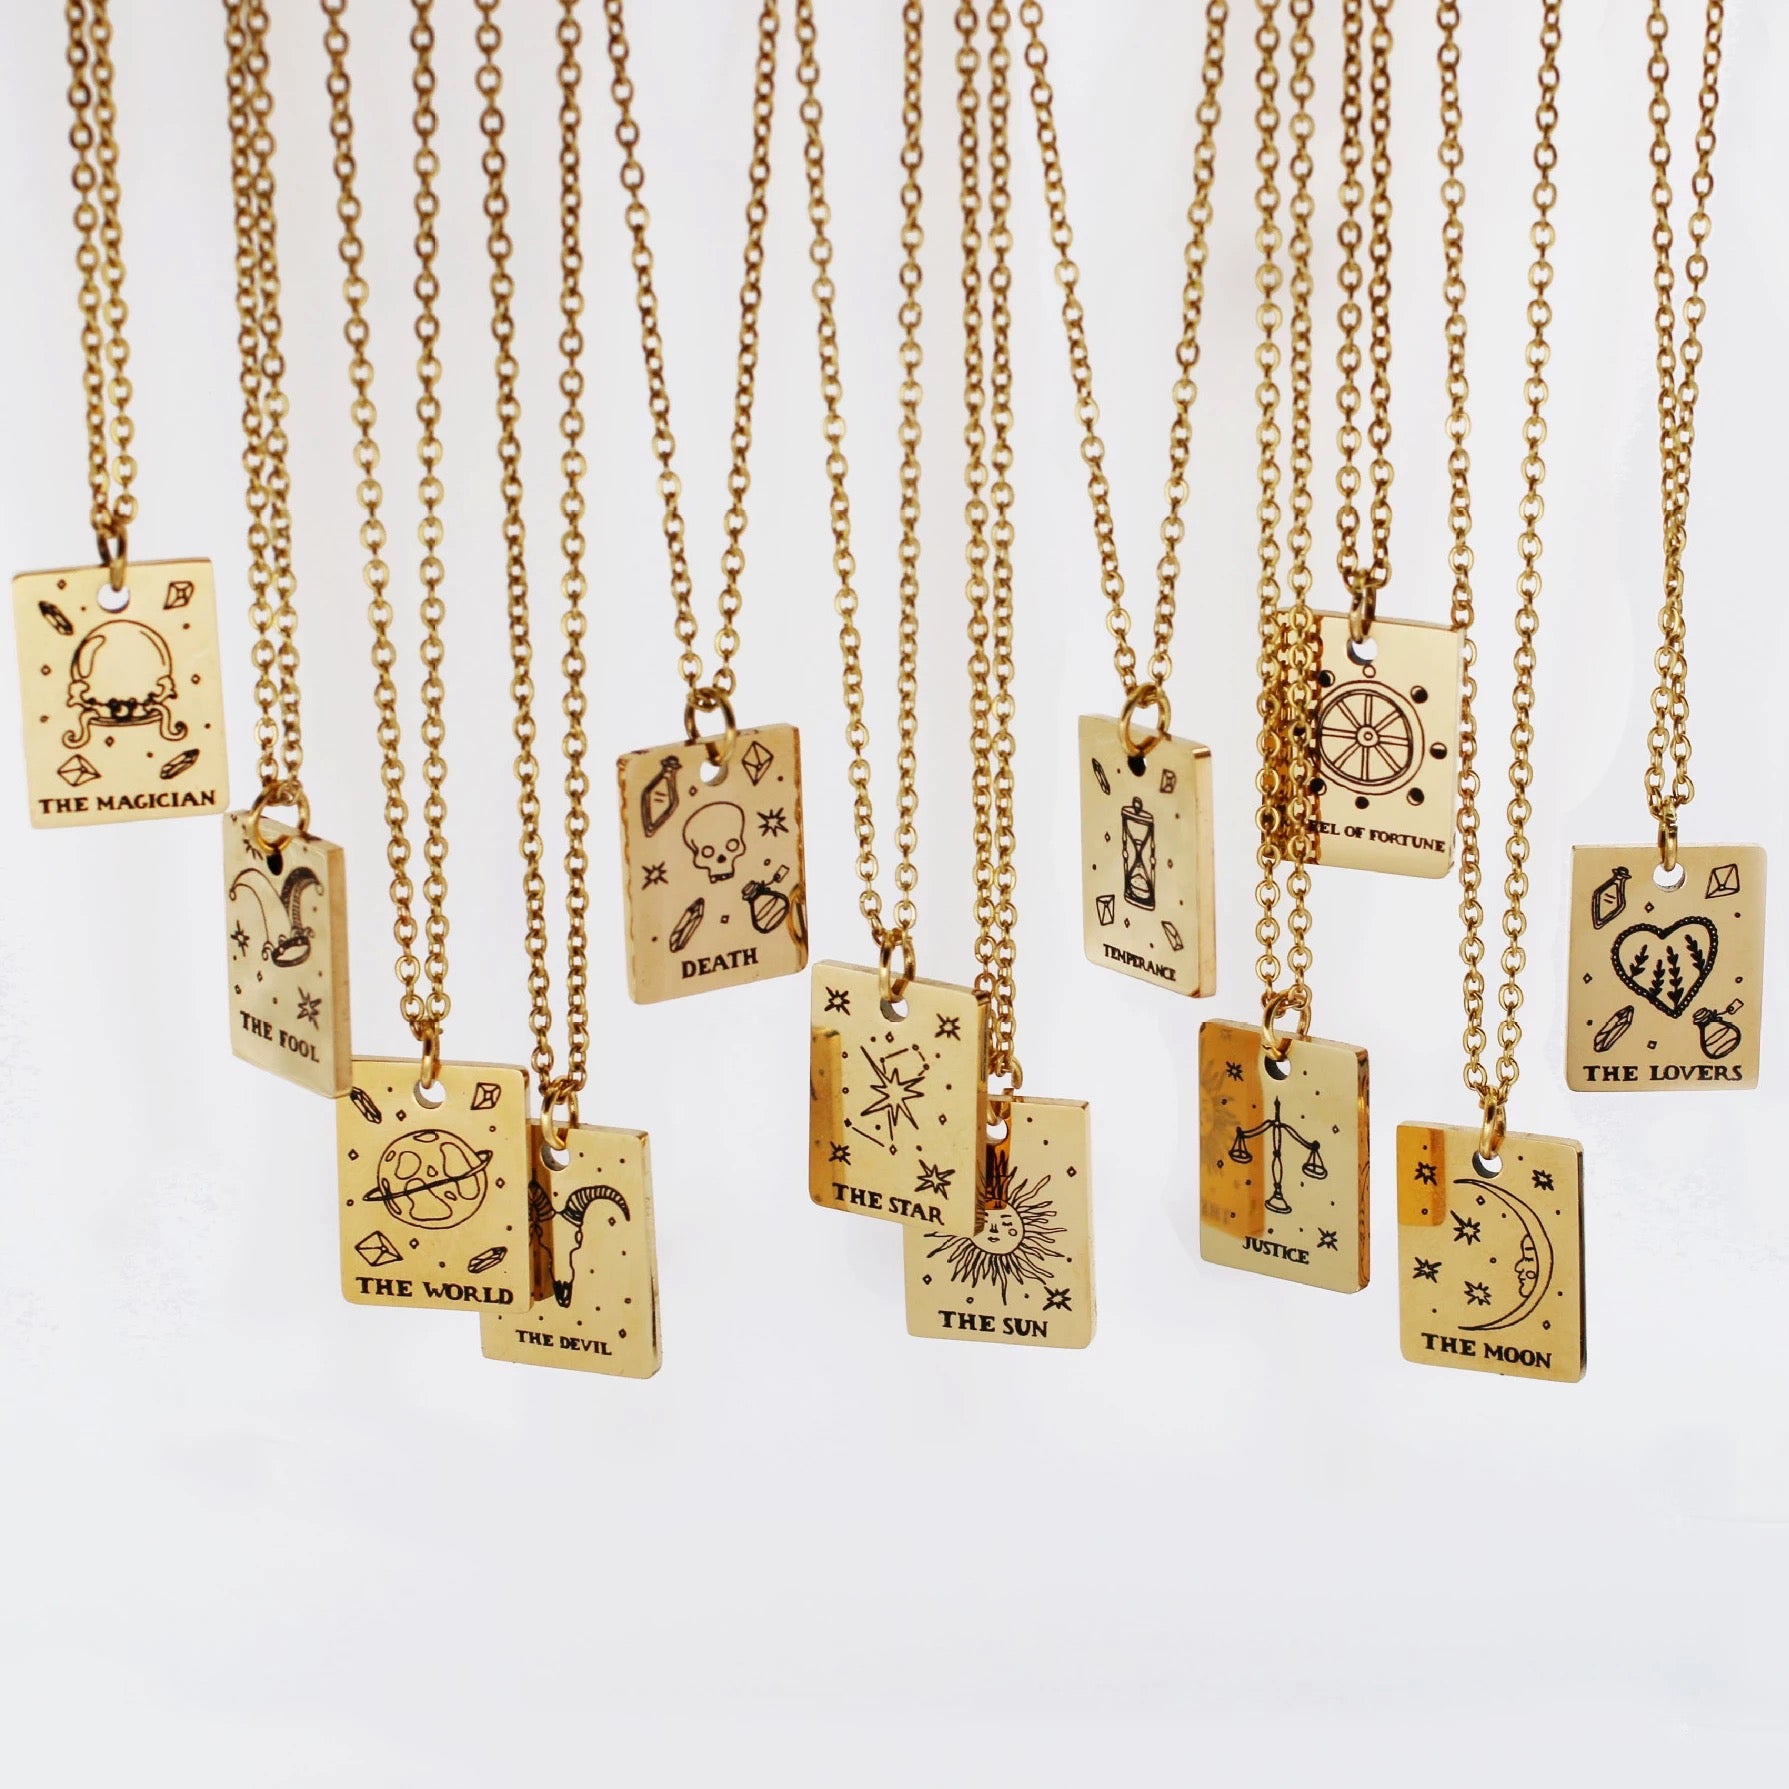 square shaped tarot card necklaces